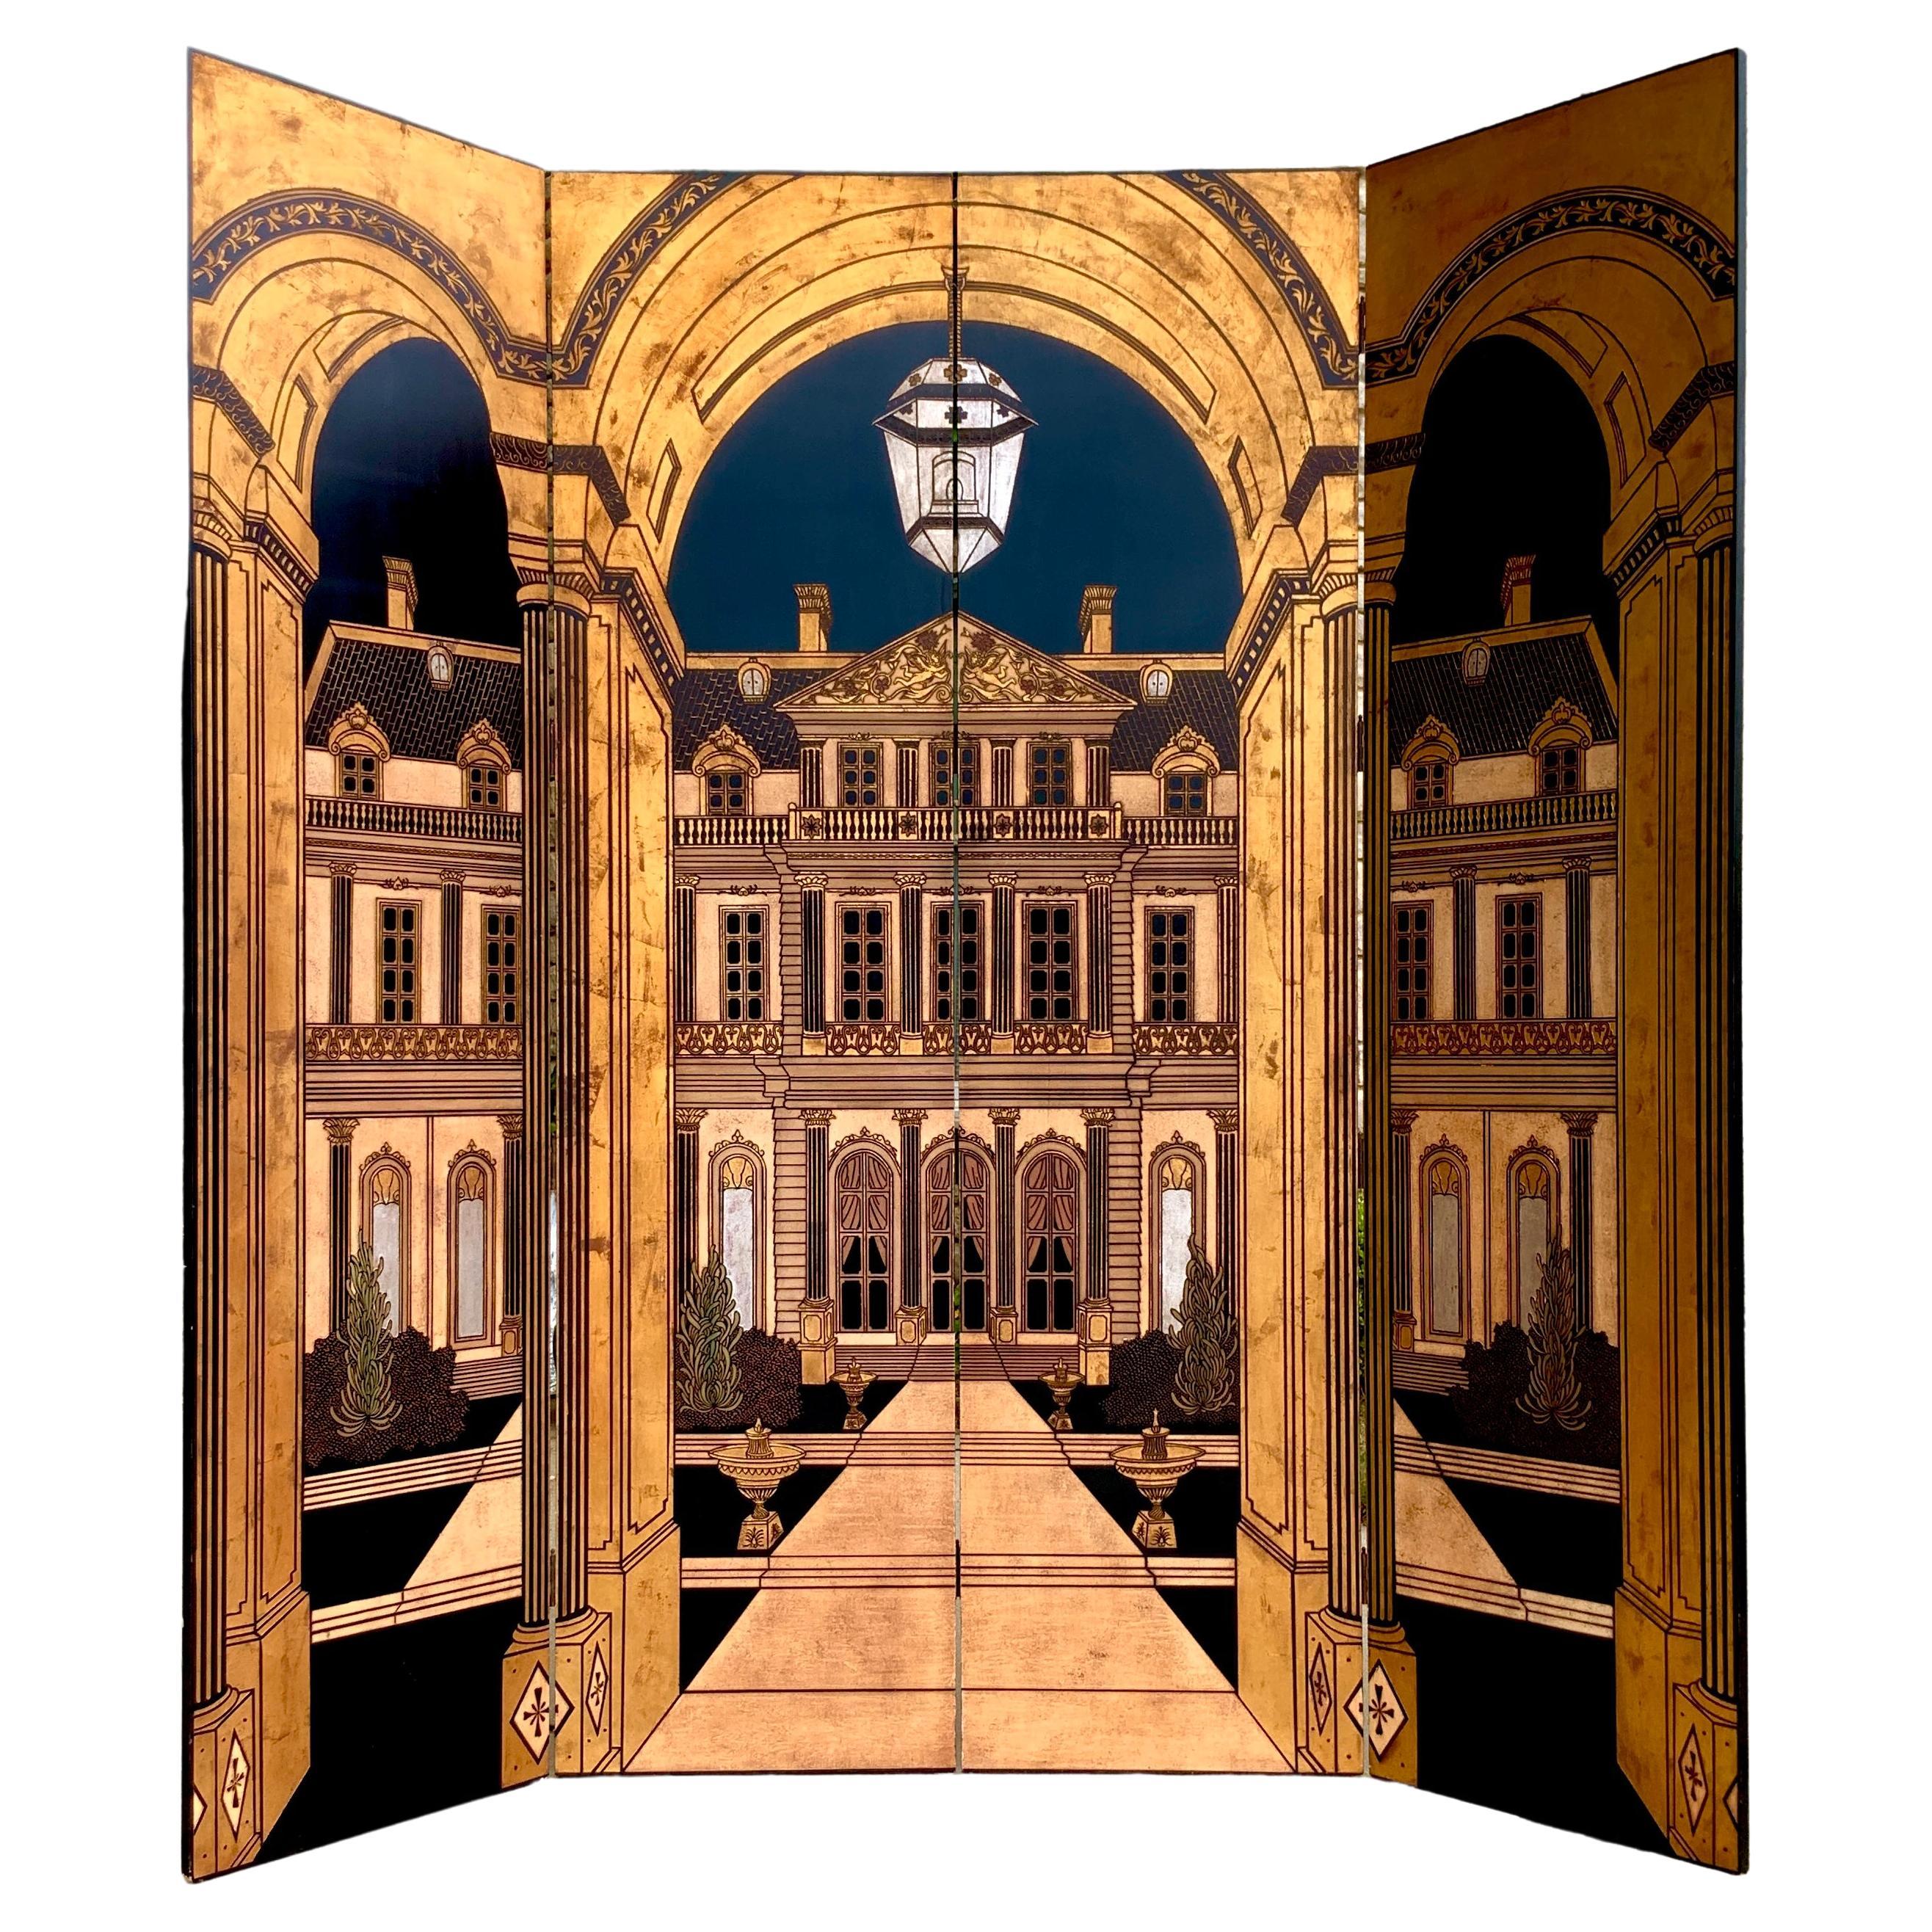 A monumental Art Deco screen or room divider by Fournier Paris. 
This beautiful screen is embossed with gold leaf, hand gilding and ebony wood panels with textured painting. Architectural decor the screen has 4 folding panels. This screen will be